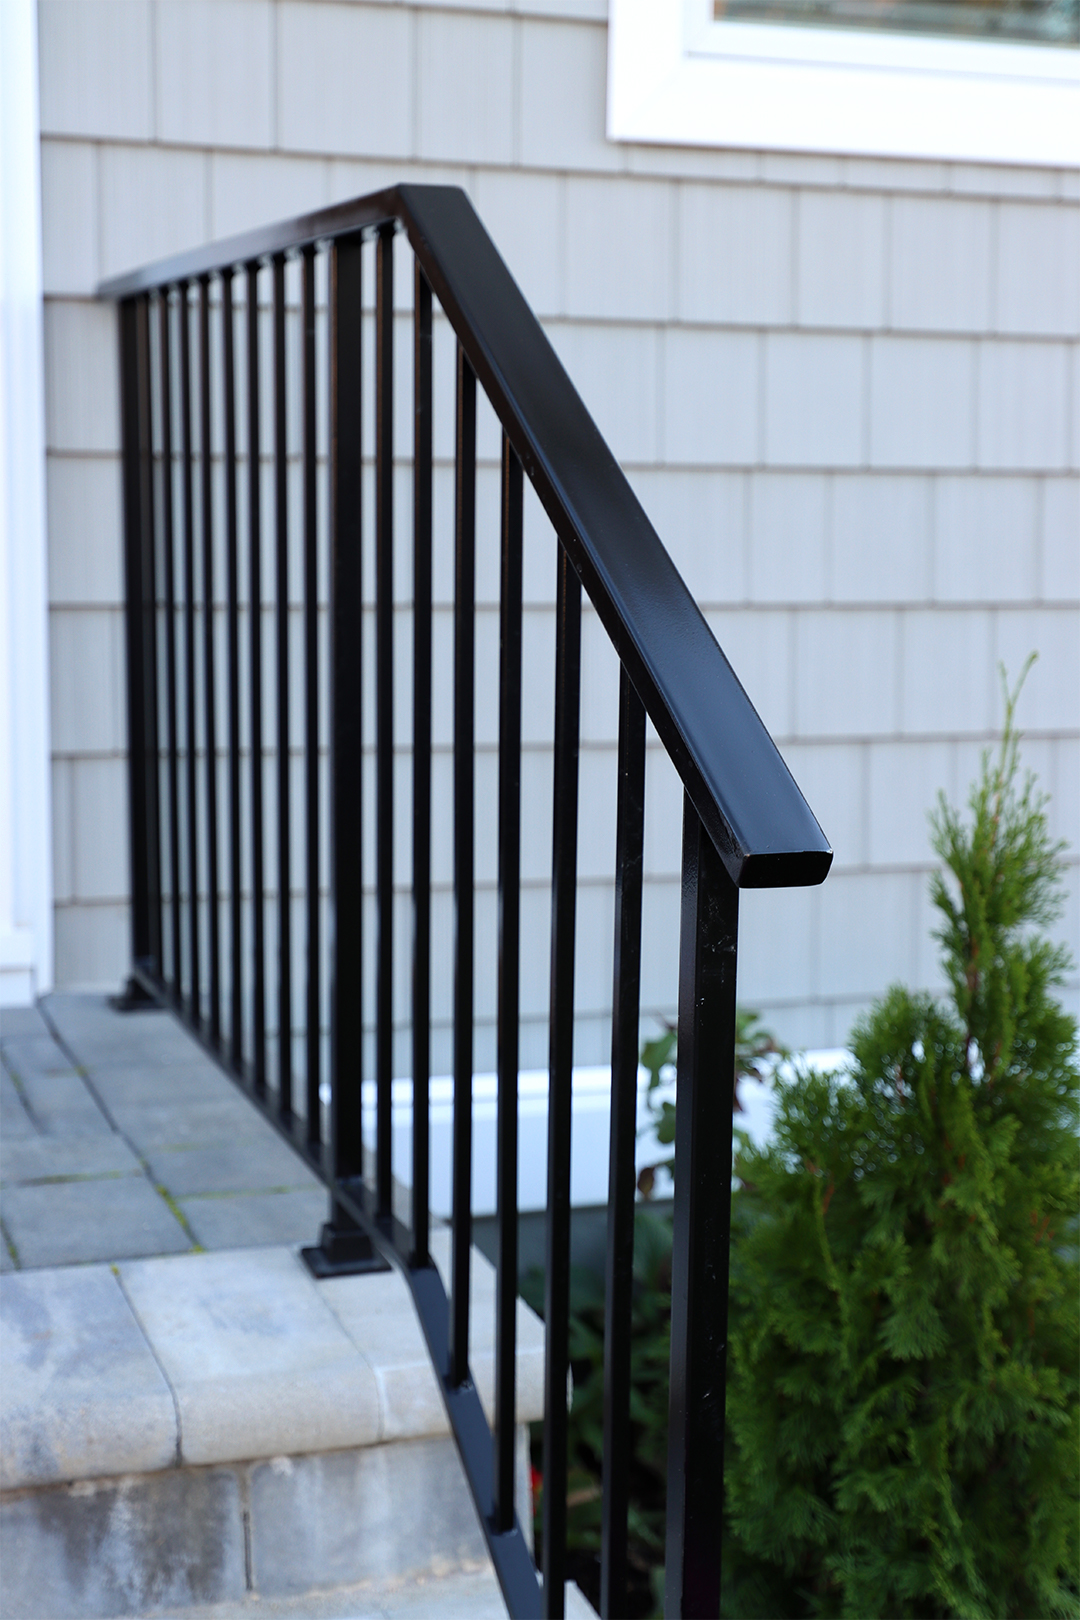 Wrought Iron Railing, Style #5 in Black, Evenly Spaced Picket Pattern